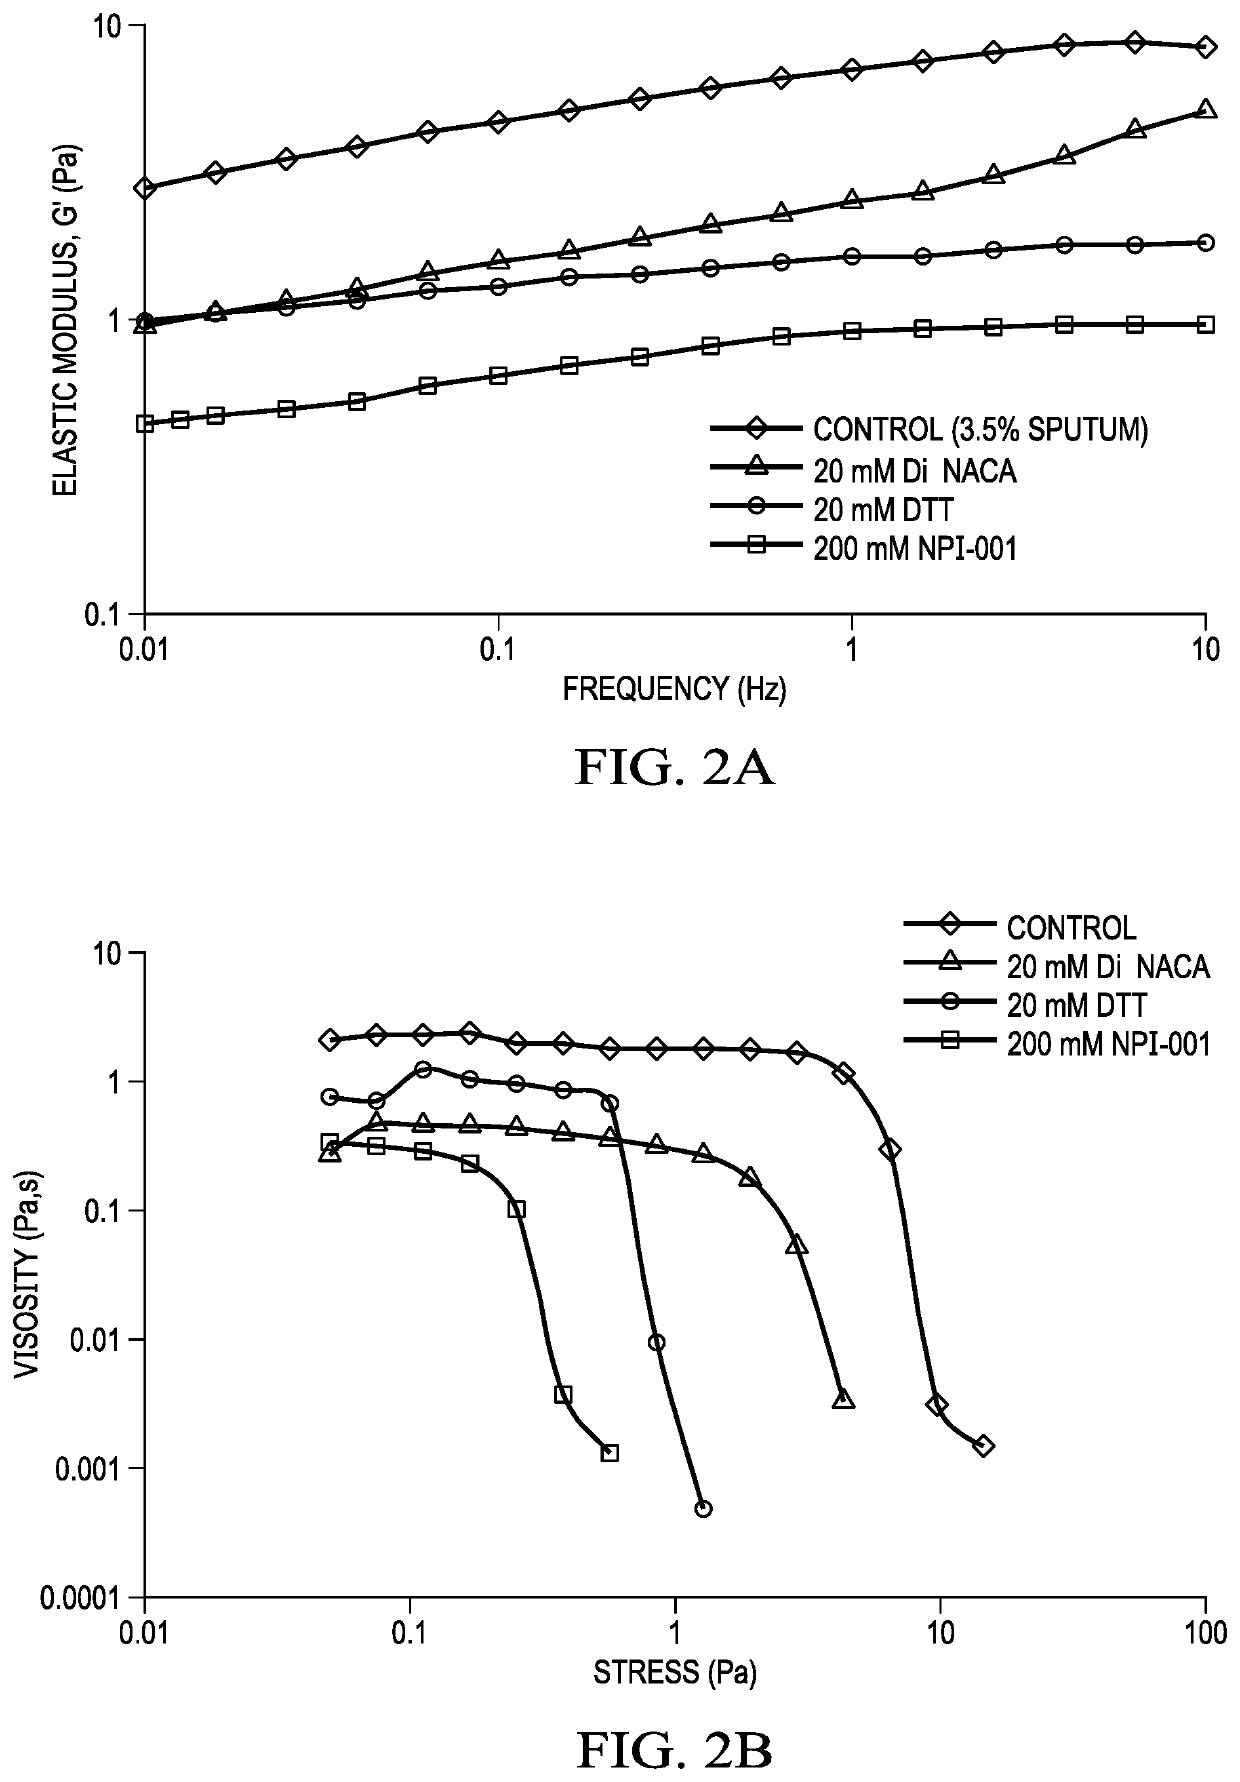 N-Acetylcysteine Amide (NACA) and (2R,2R')-3,3' disulfanediyl BIS(2-Acetamidopropanamide) (DINACA) for the Prevention and Treatment of Radiation Pneumonitis and Treatment of Pulmonary Function in Cystic Fibrosis